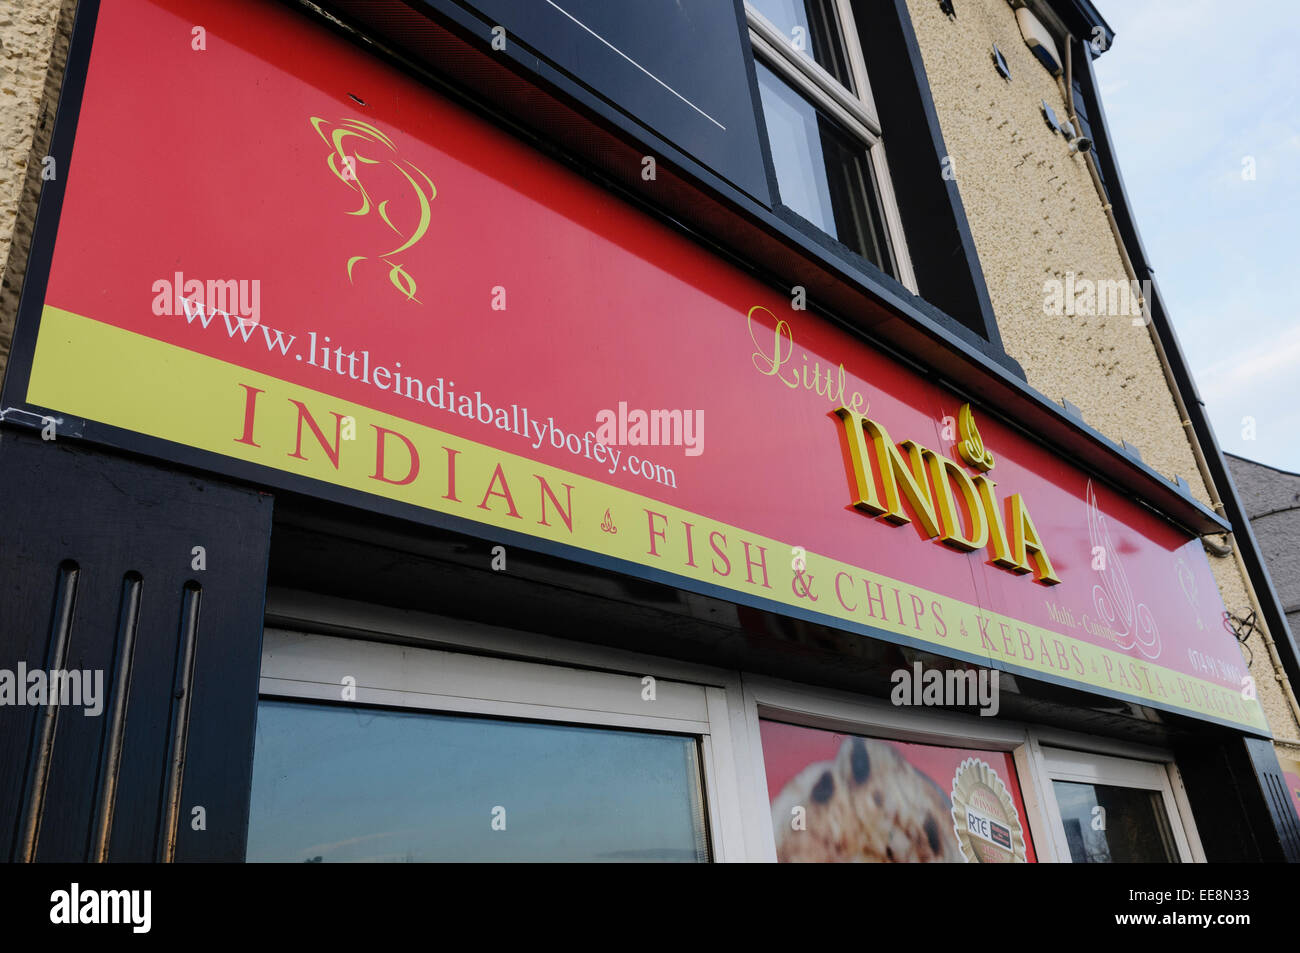 Indian take-away, also selling fish and chips, kebabs, pasta and burgers Stock Photo